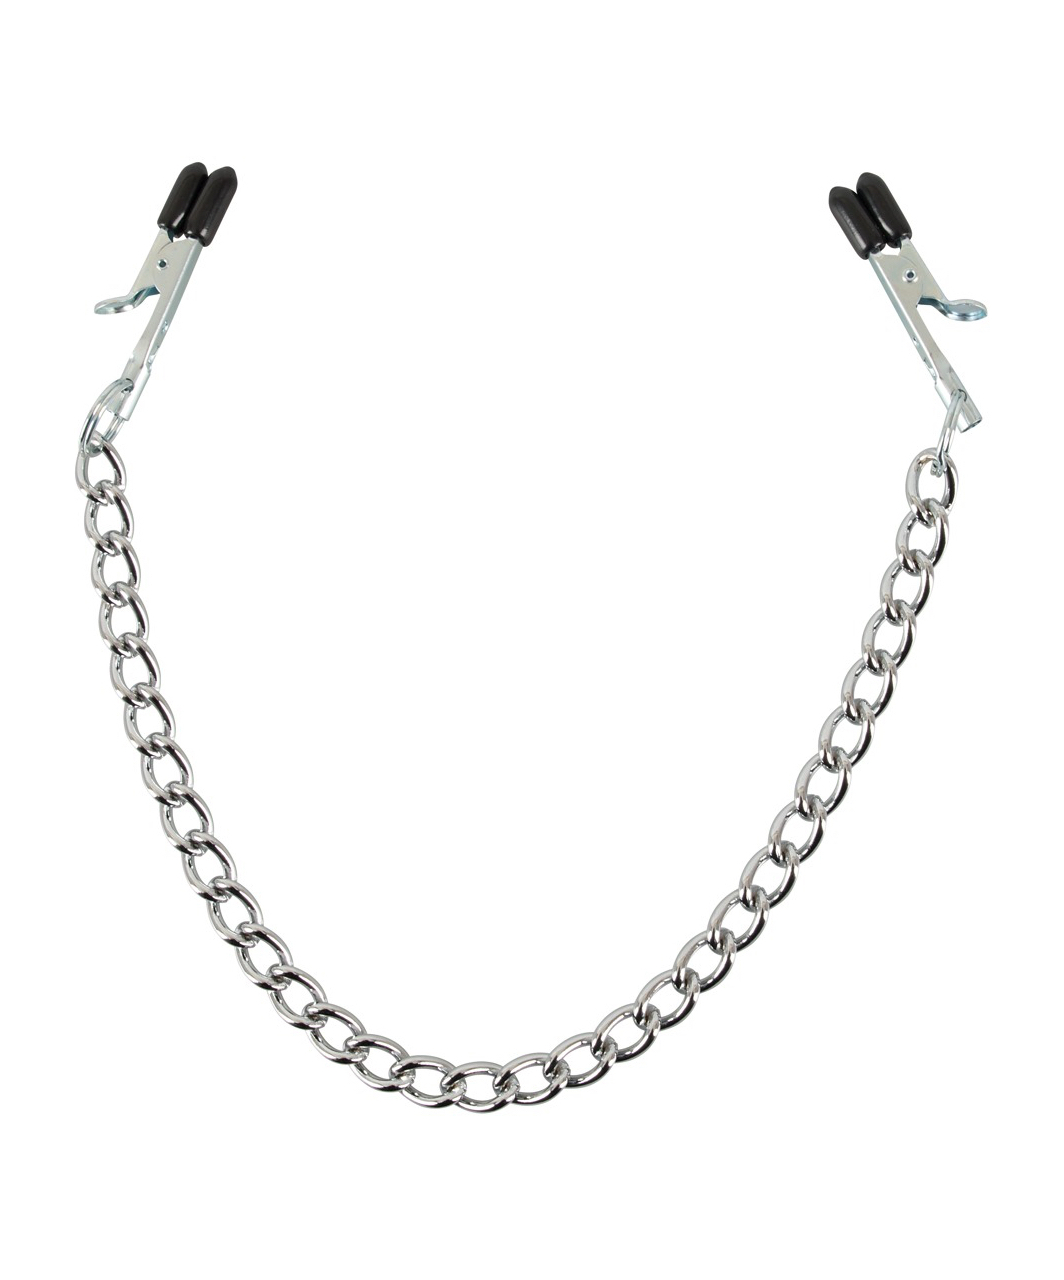 Sextreme nipple clamps with chain